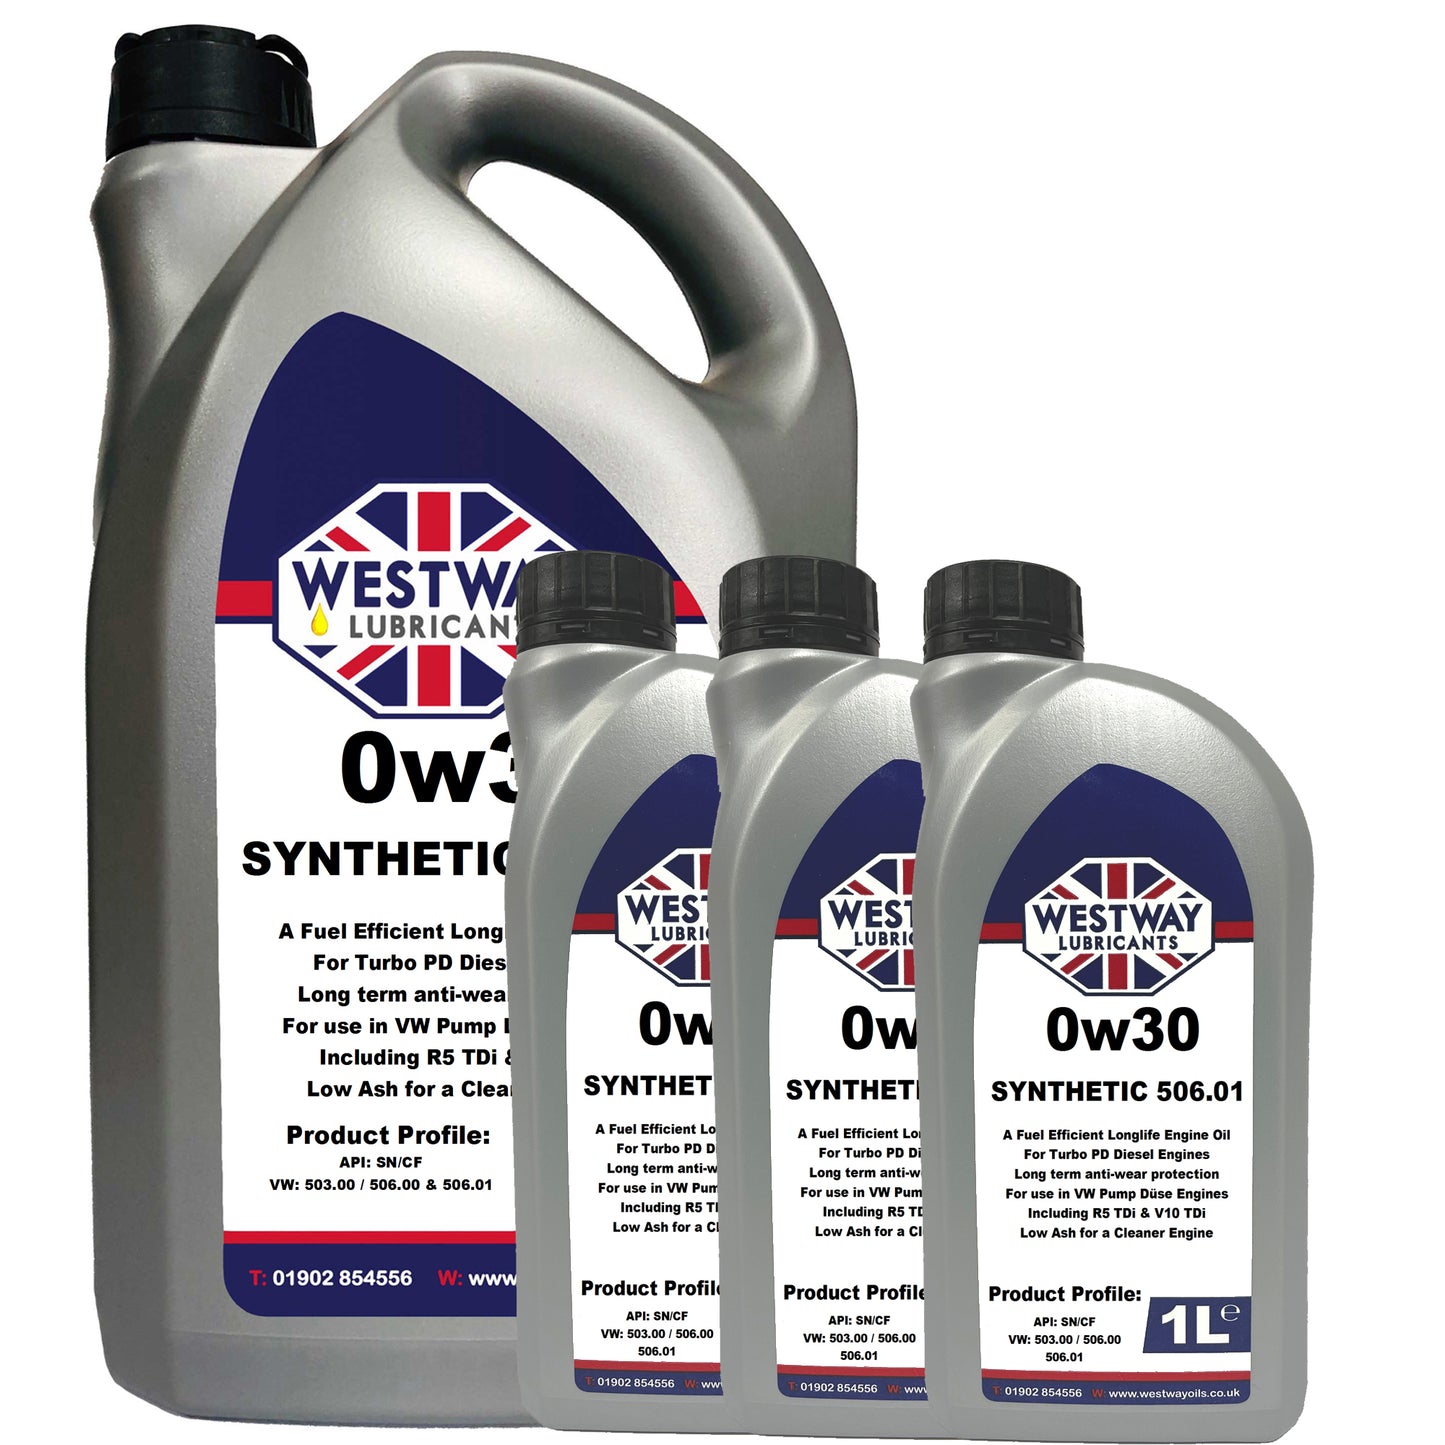 0w30 Fully Synthetic VW 506.01 Low SAPS Engine Oil